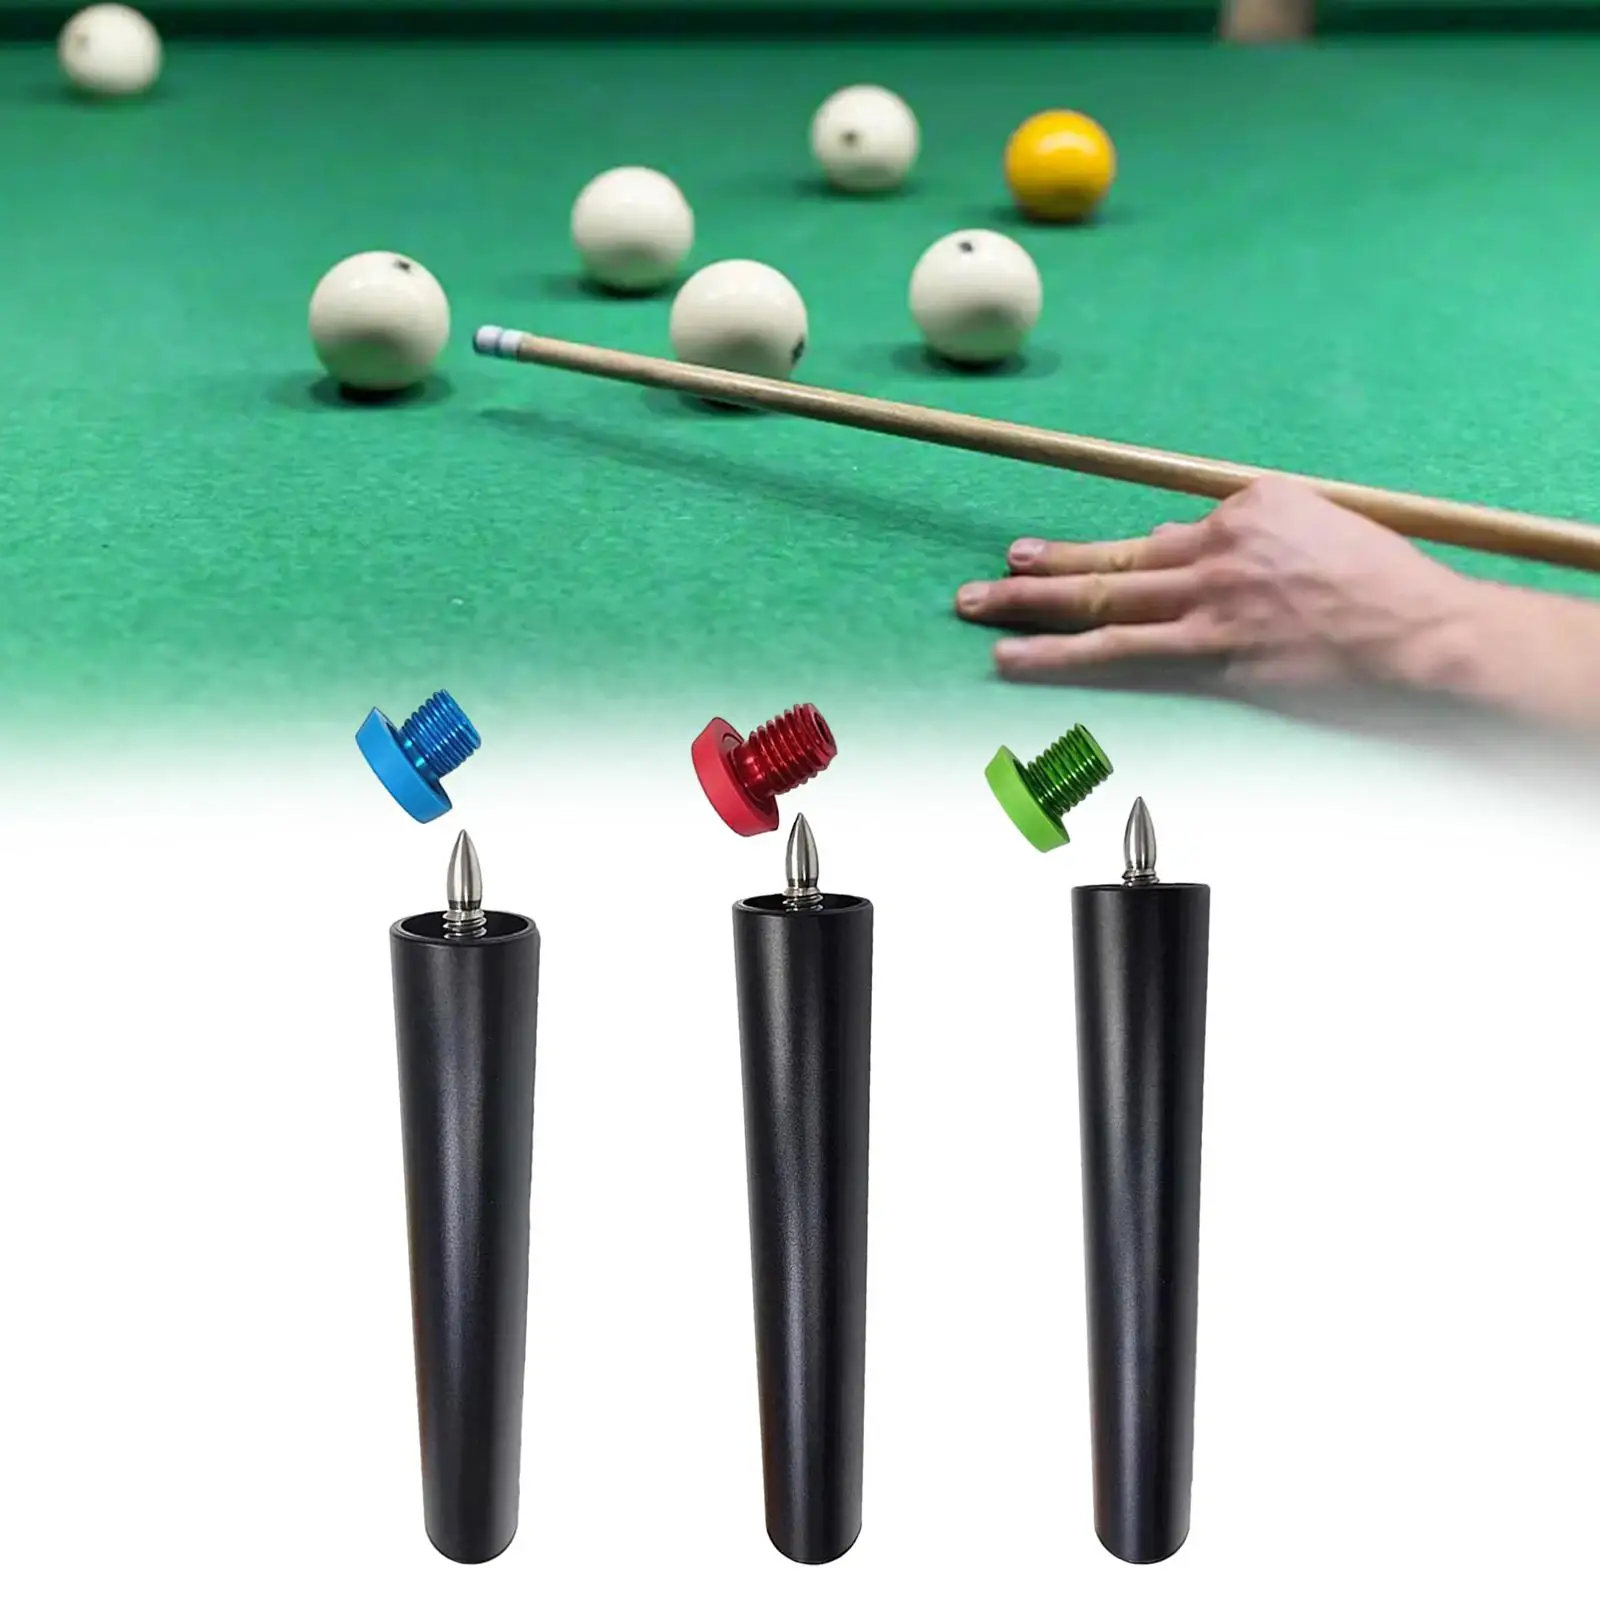 Pool Cue Extender Cue End Lengthener Billiards Pool Cue Extension Strong Tool Length 8inch for Billiard Cues Enthusiast Parts